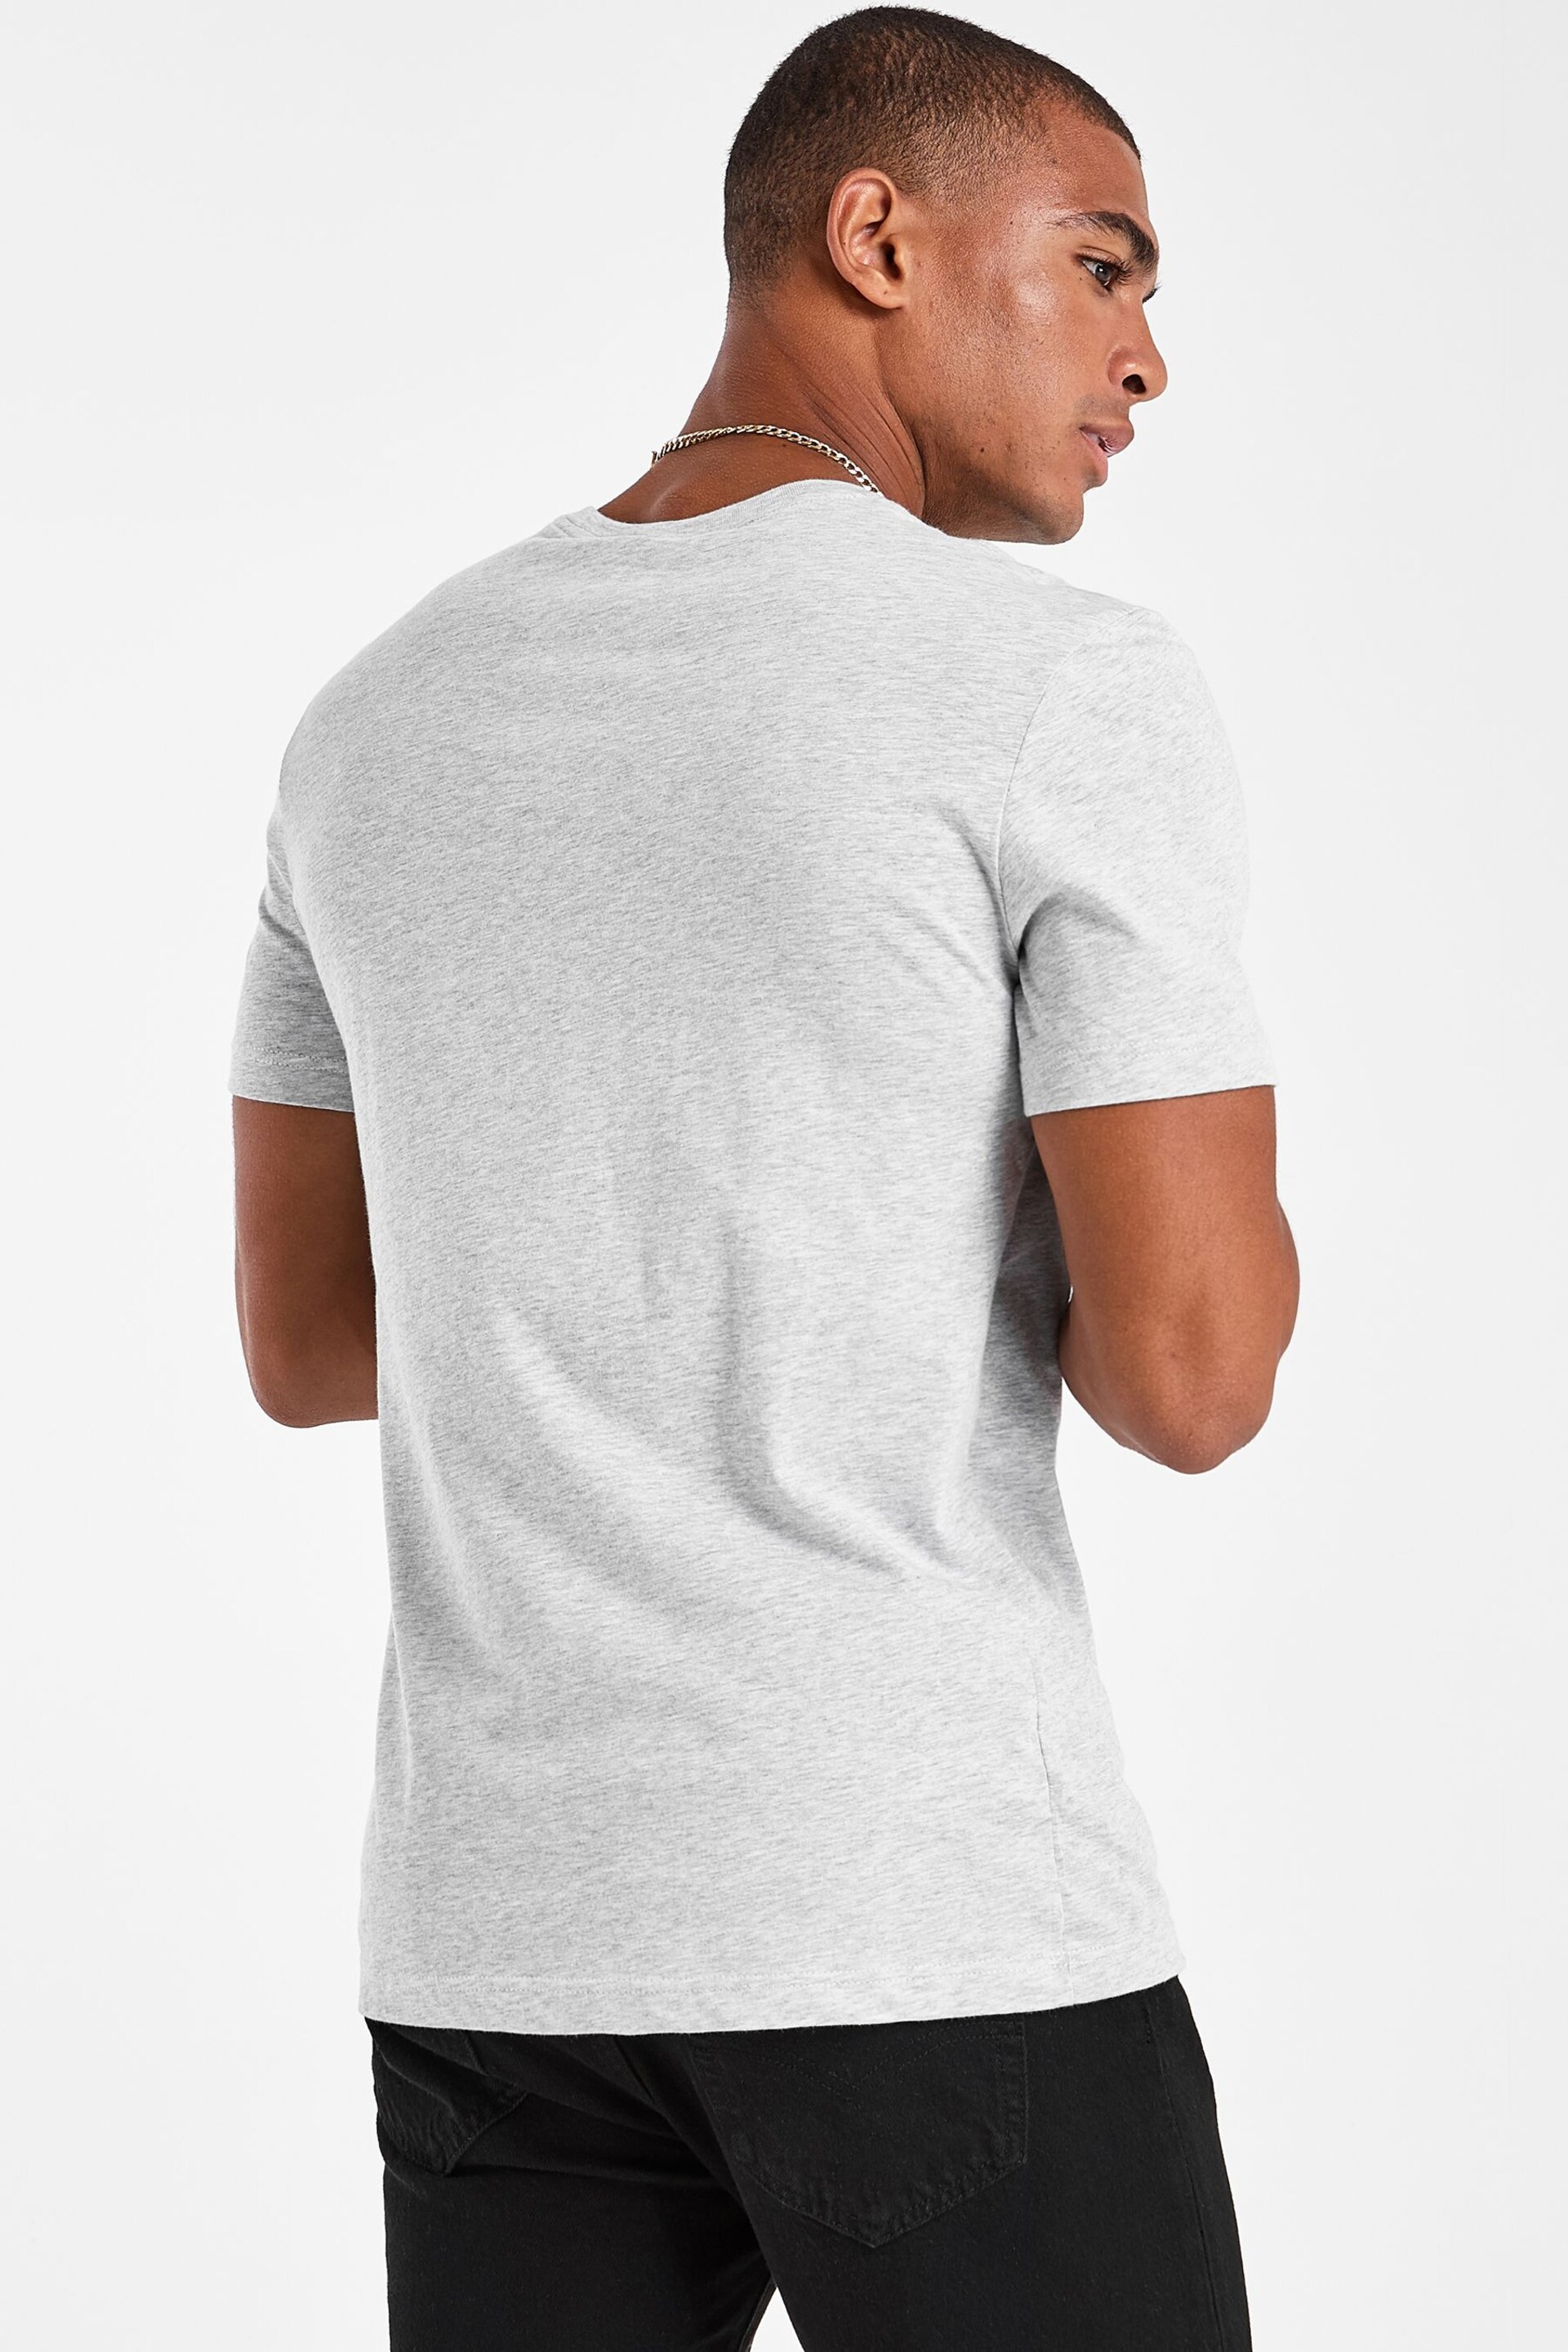 Lacoste Sports Regular Fit Cotton T-Shirt - Image 2 of 6